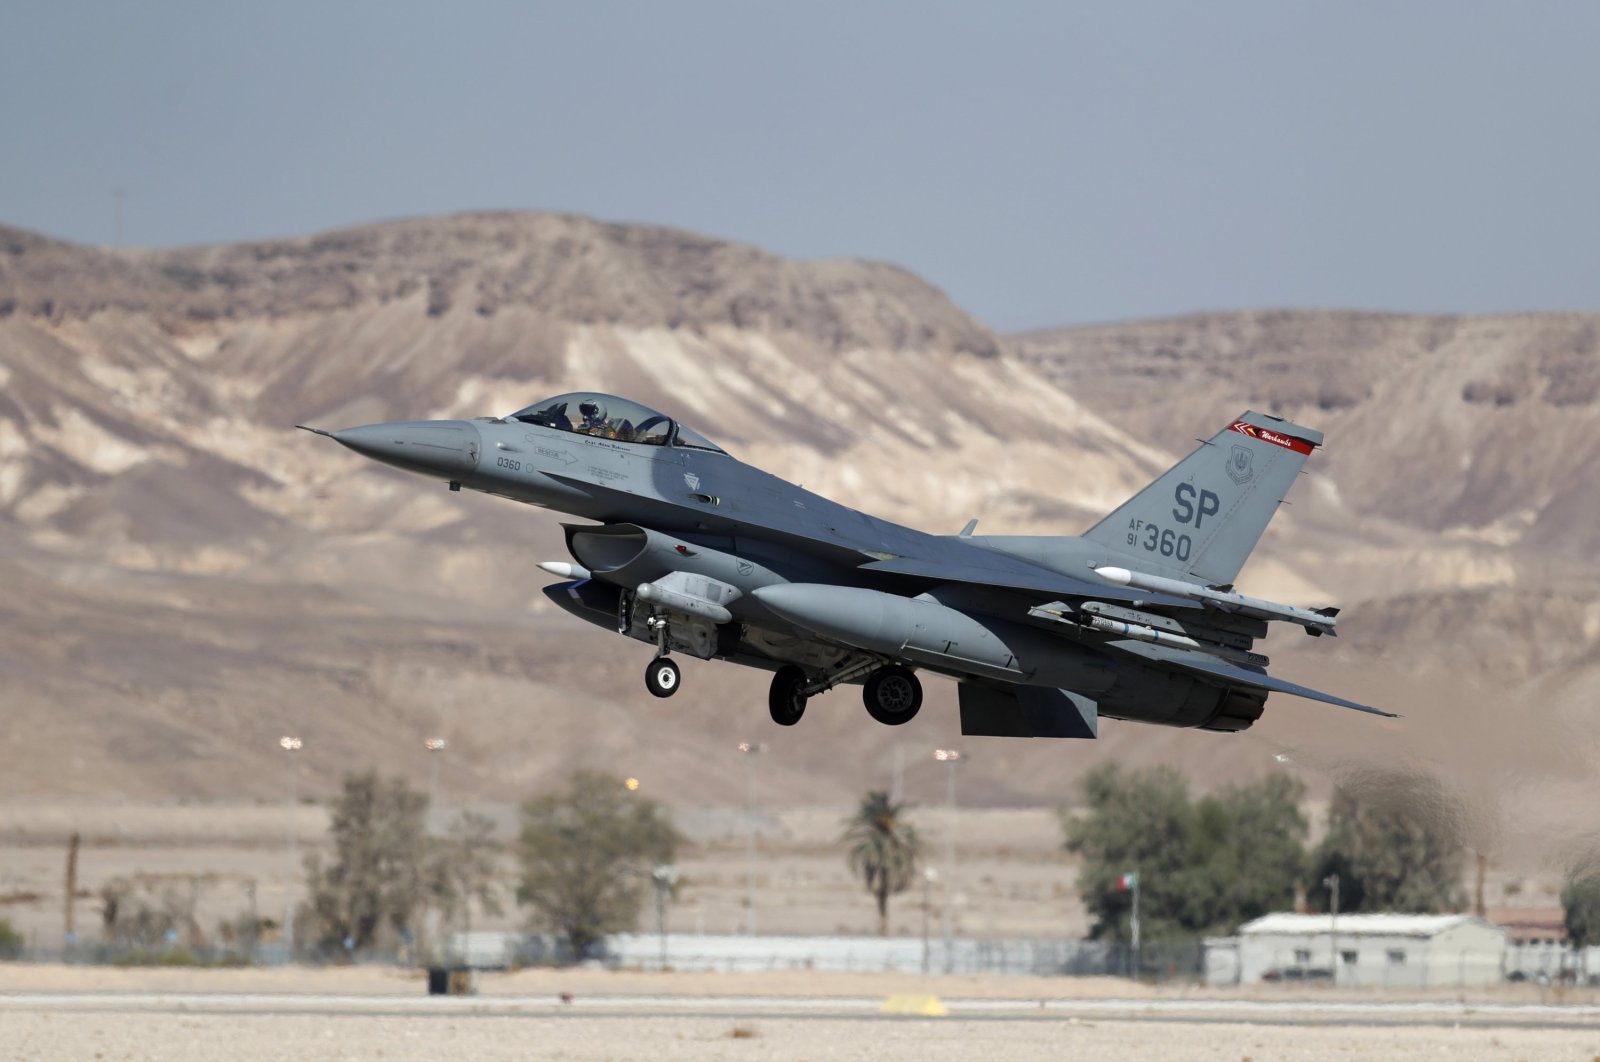 A U.S. F-16 aircraft takes off during the &quot;Blue Flag&quot; multinational air defense exercise at the Ovda air force base, north of the Israeli city of Eilat, Oct. 24, 2021. (EPA Photo)